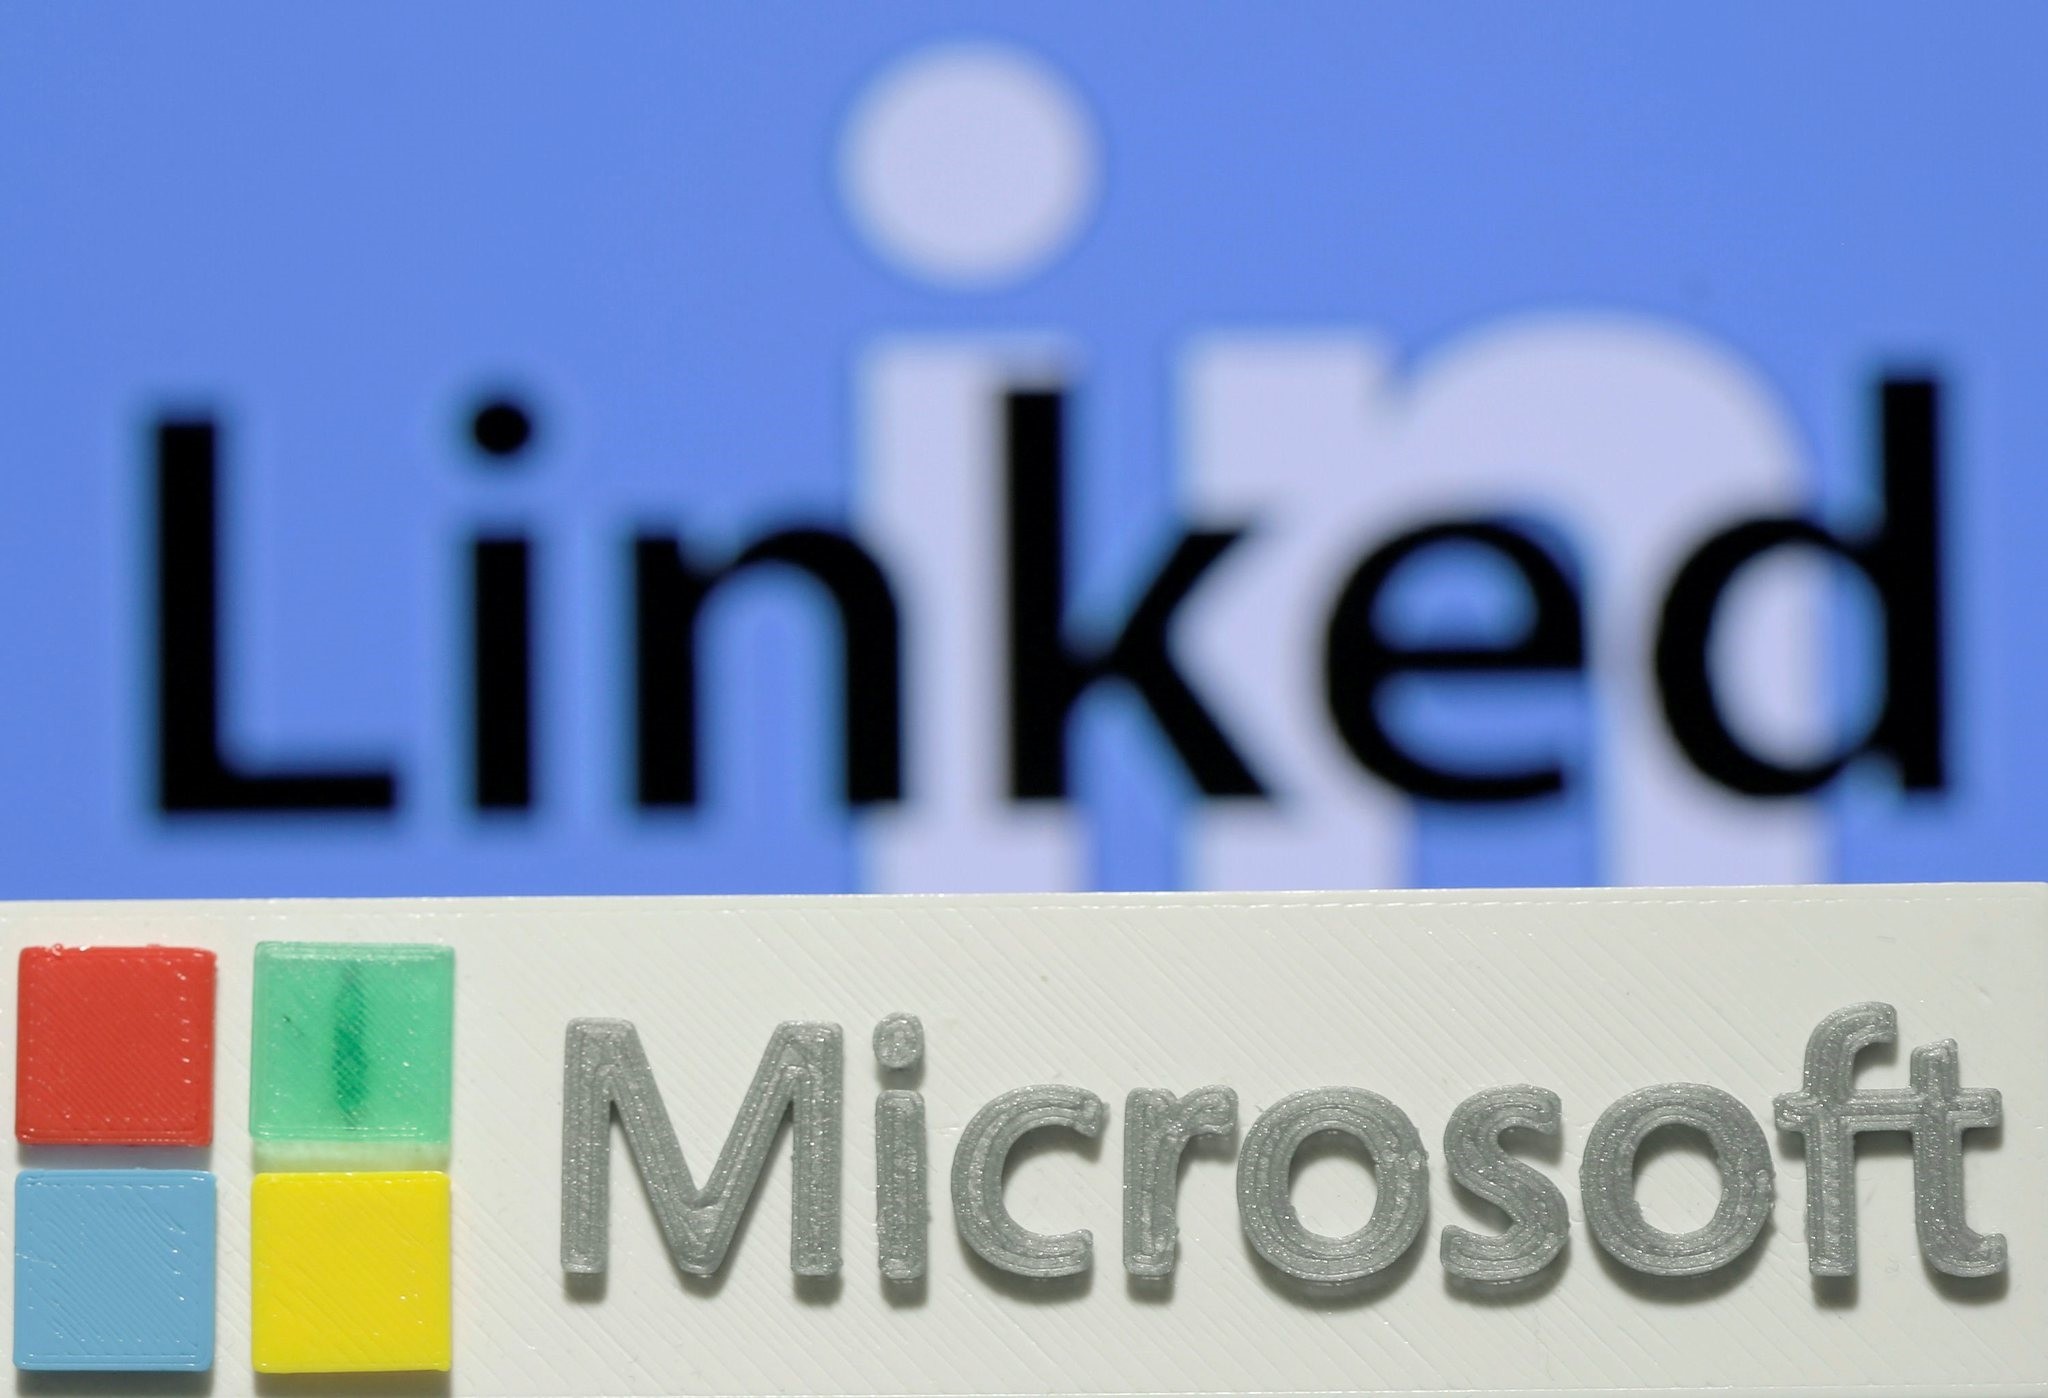 A 3D PRINTED LOGO OF MICROSOFT IS SEEN IN FRONT OF A DISPLAYED LINKEDIN LOGO IN THIS ILLUSTRATION TAKEN JUNE 13, 2016. (REUTERS Photo)